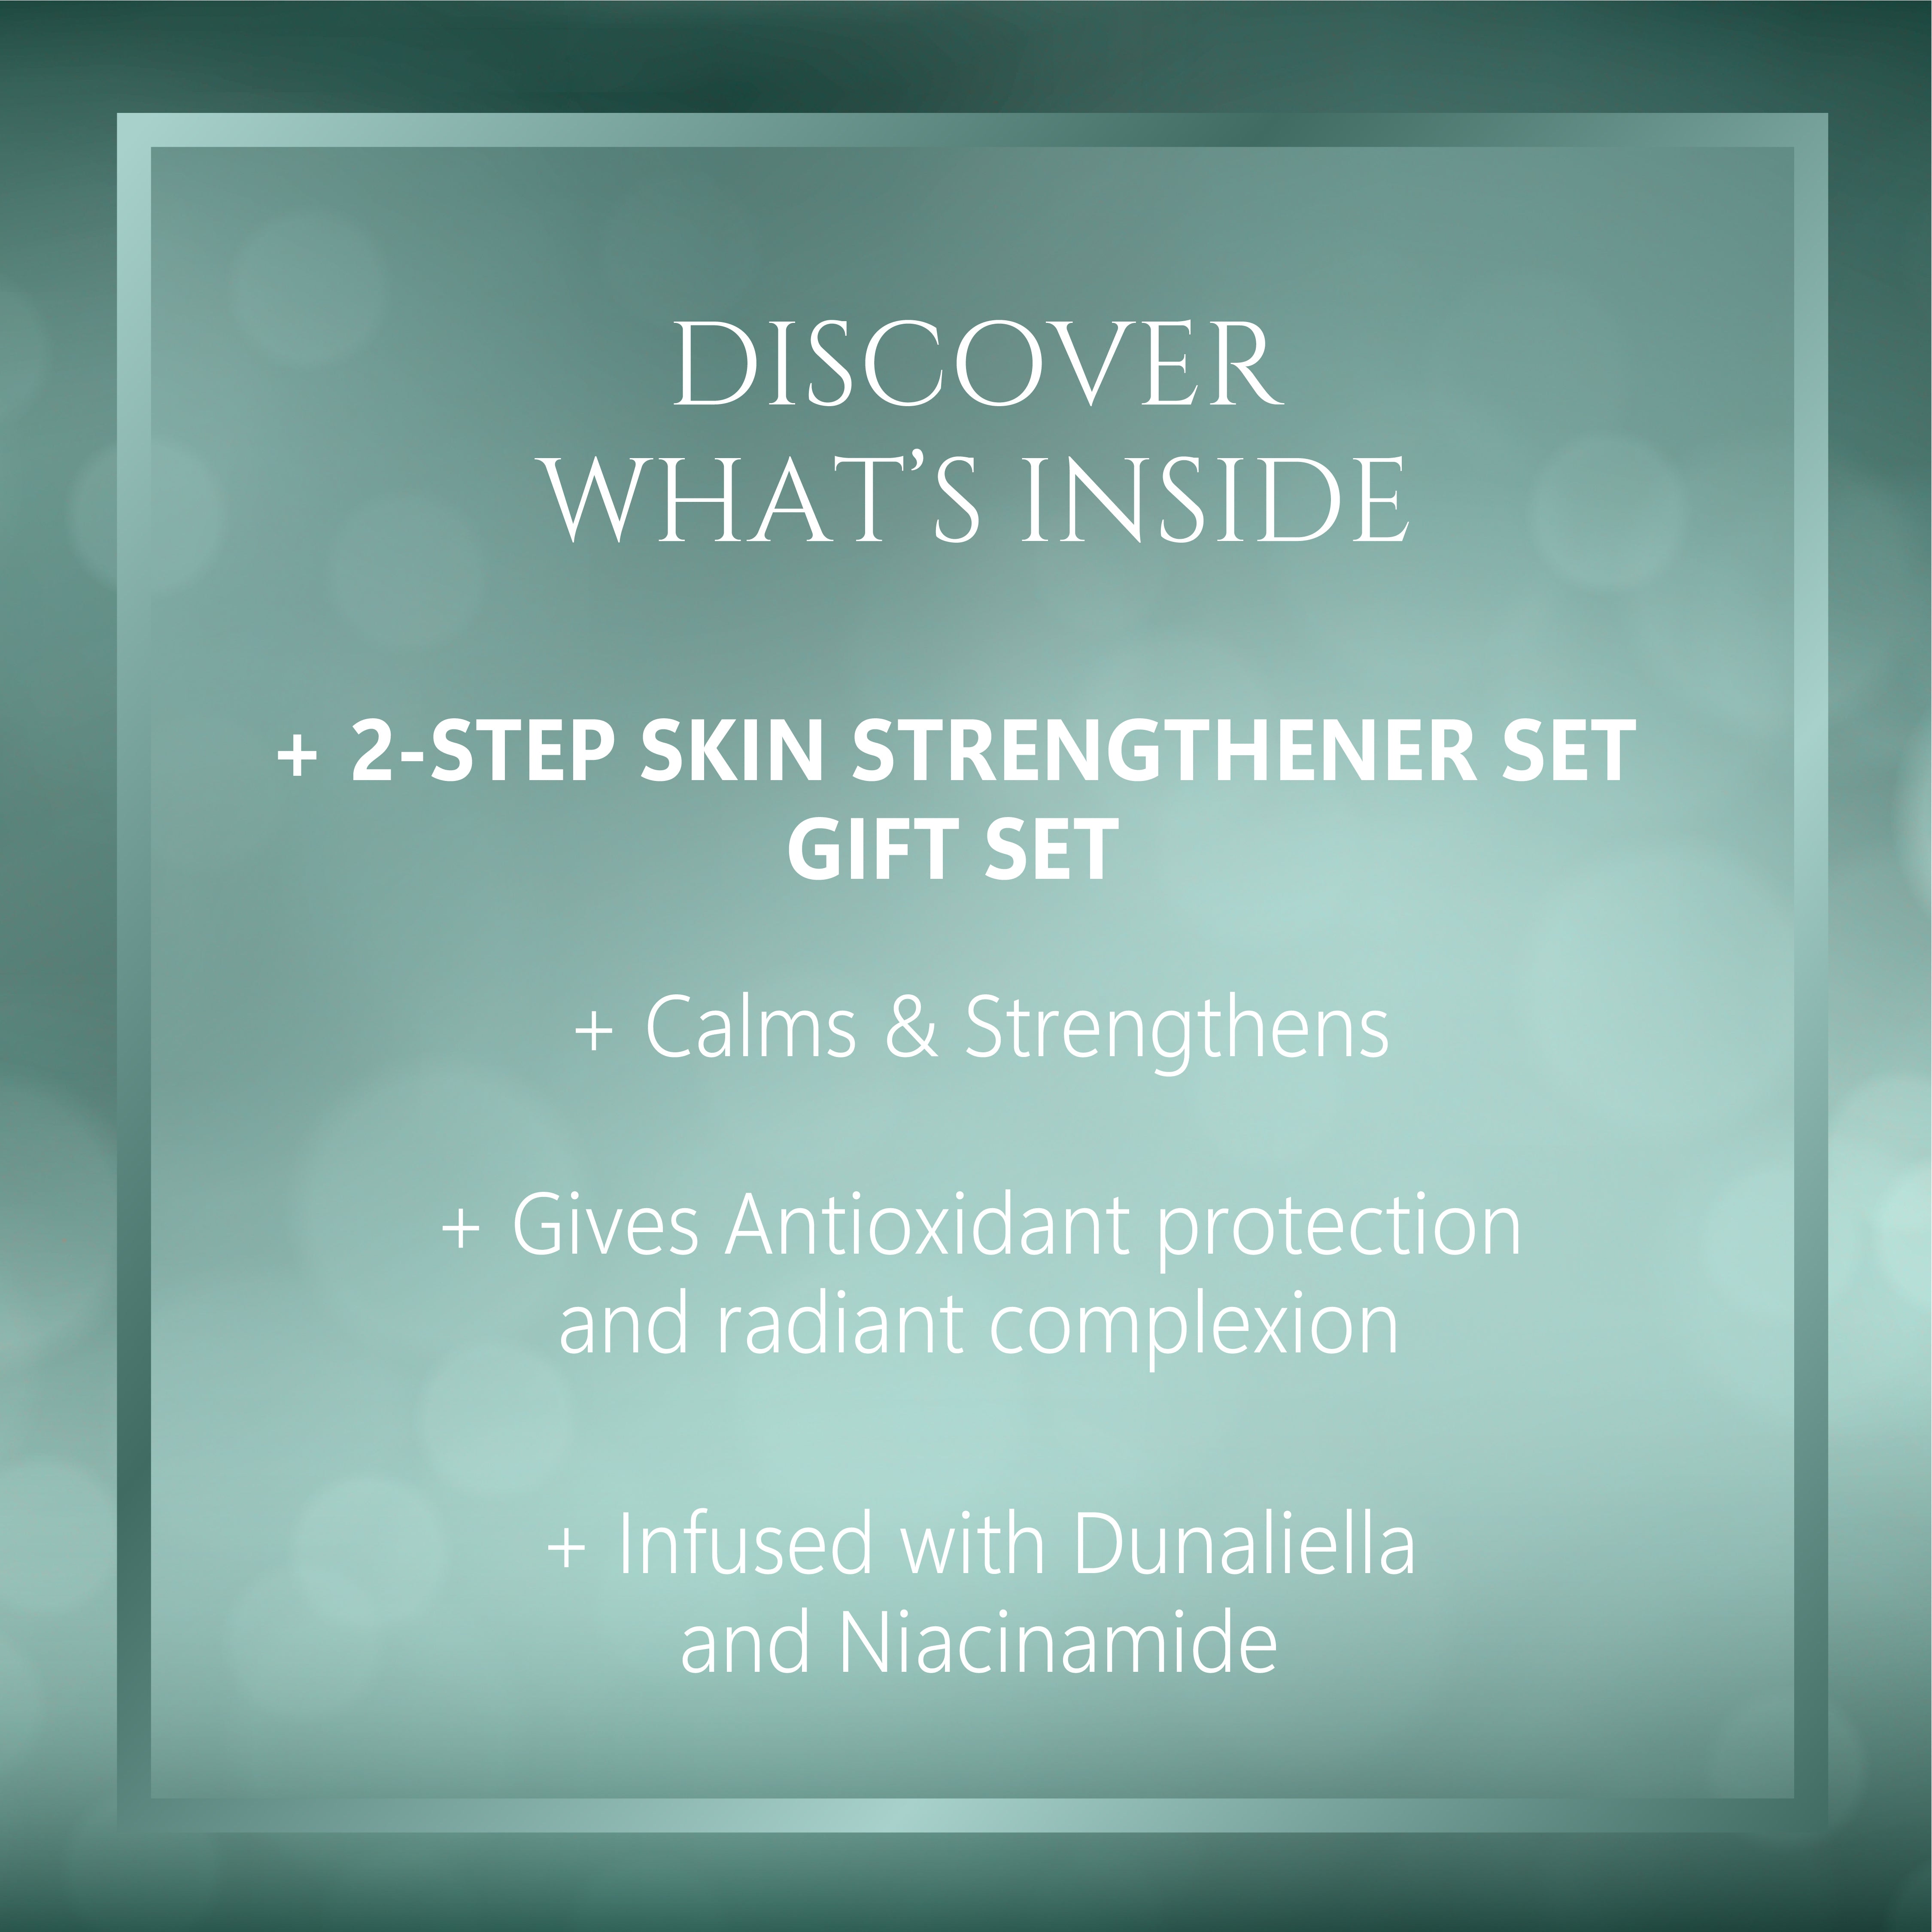 Cleanse & Protect Duo Skincare Set